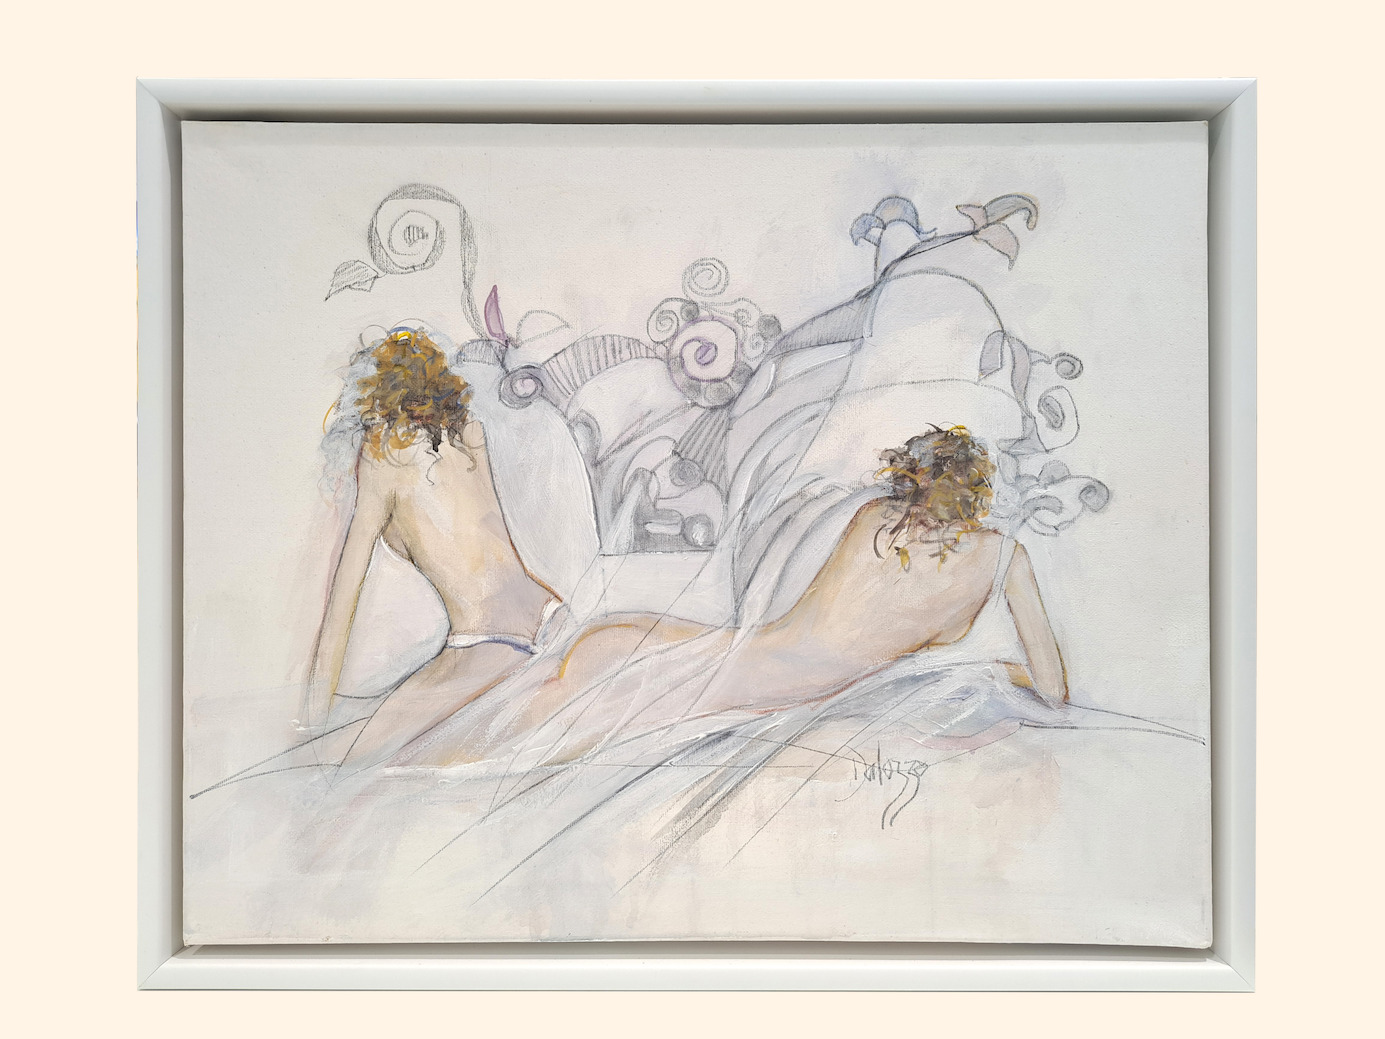 Framed Front View Of Nude Painting "Sun Bathers" By Lucette Dalozzo